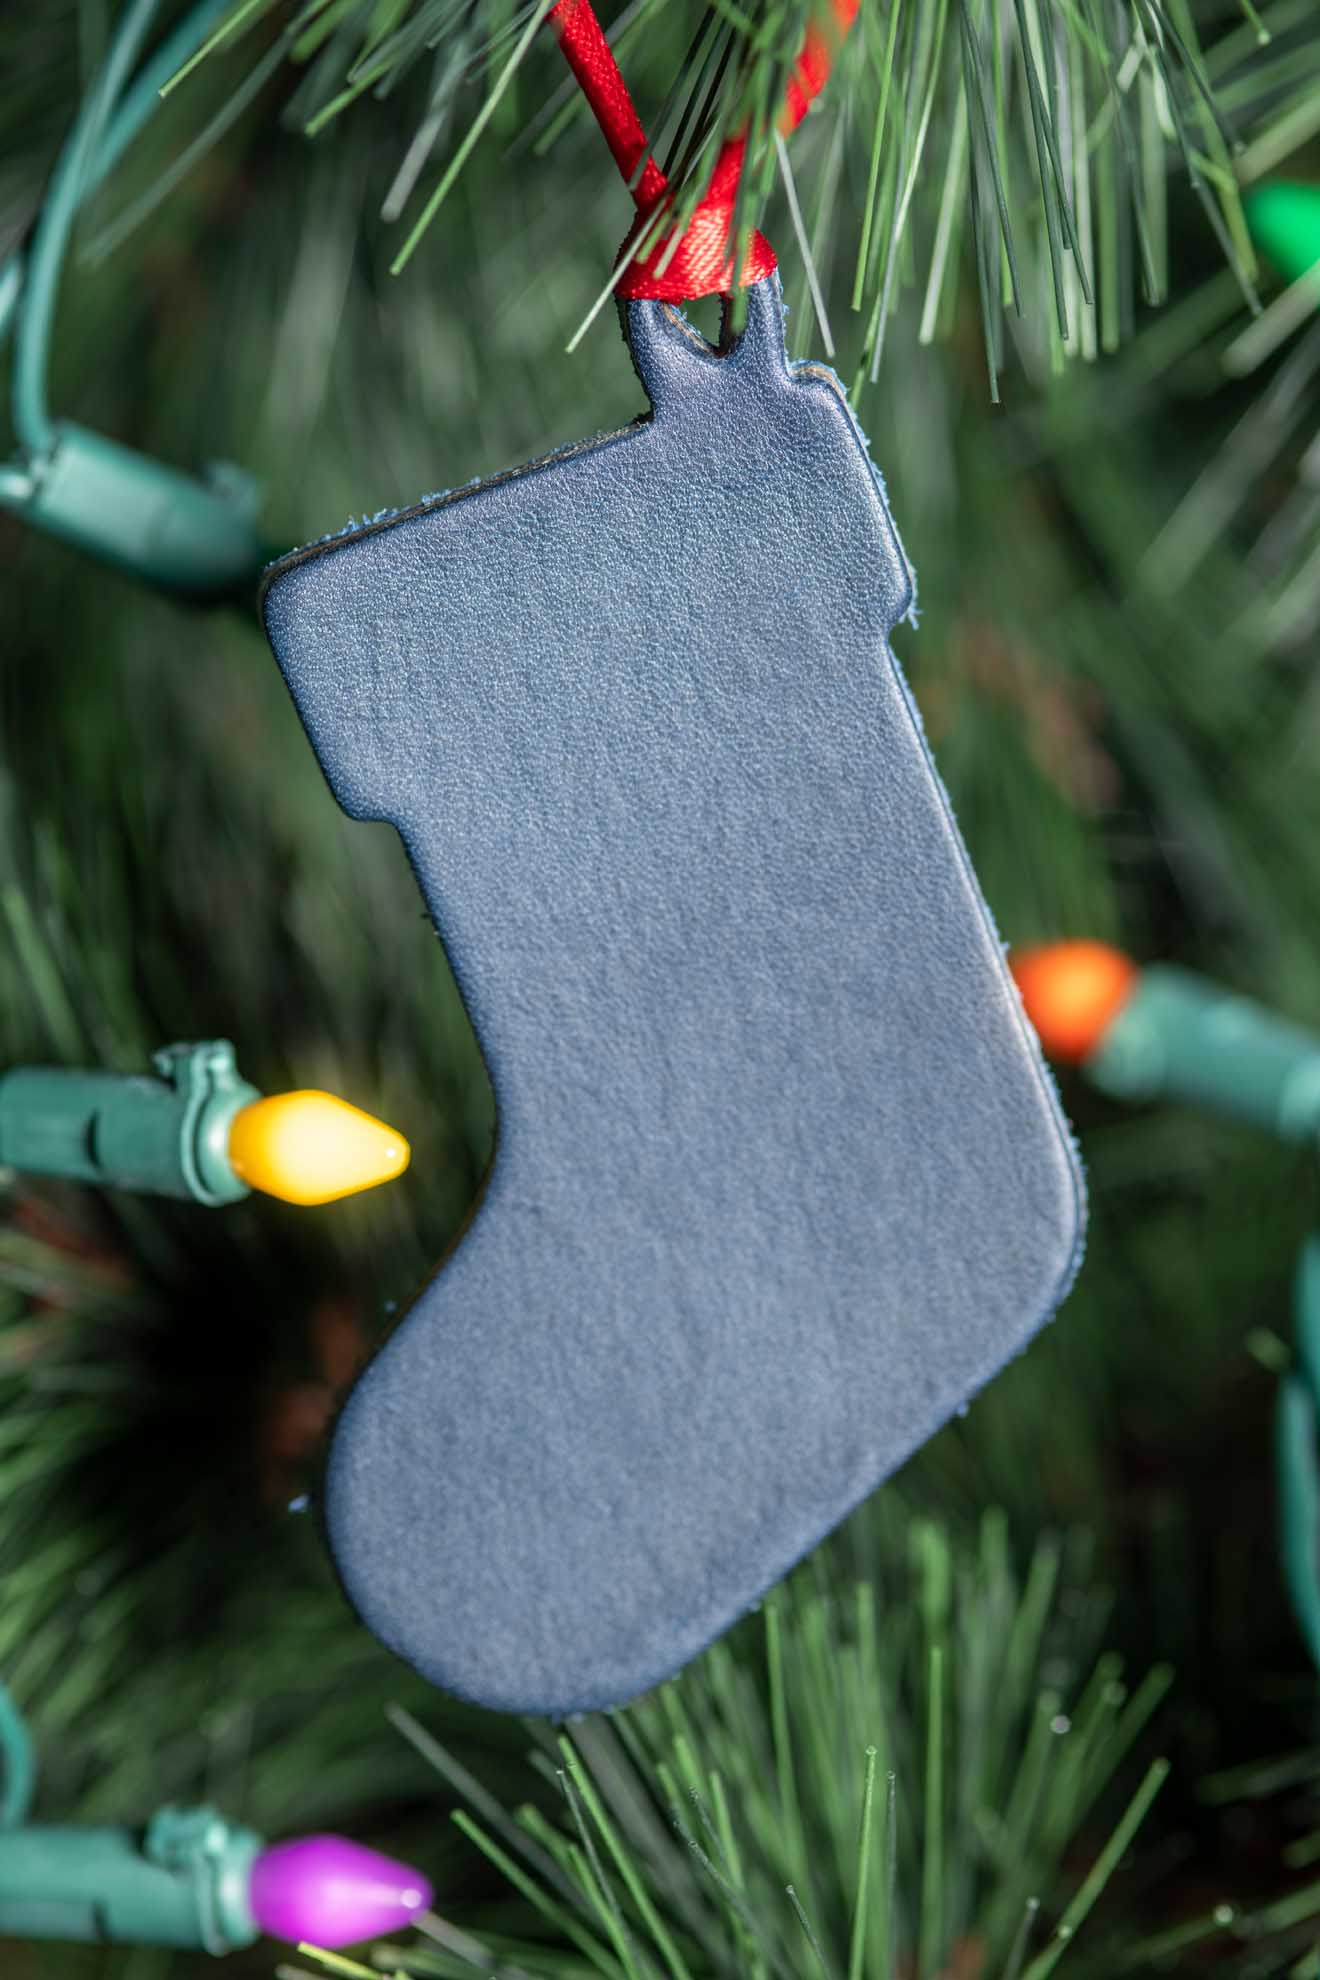 Christmas Stocking | Leather Ornament